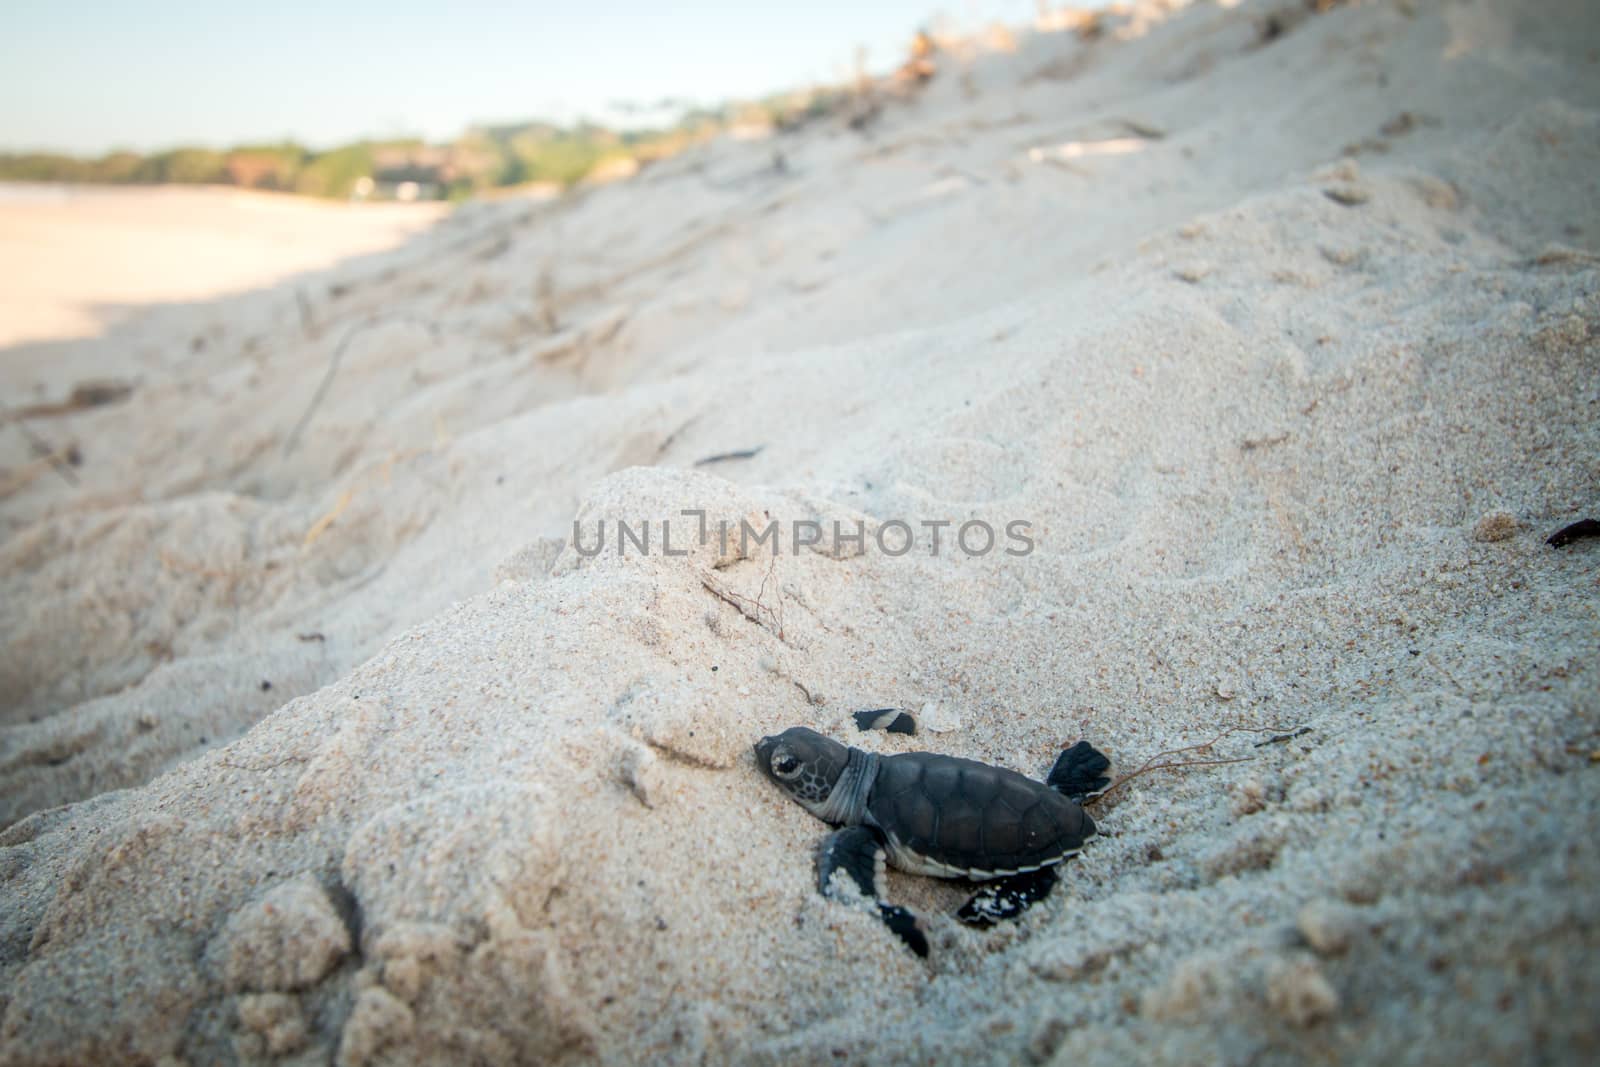 Green sea turtle hatchling on the beach. by Simoneemanphotography